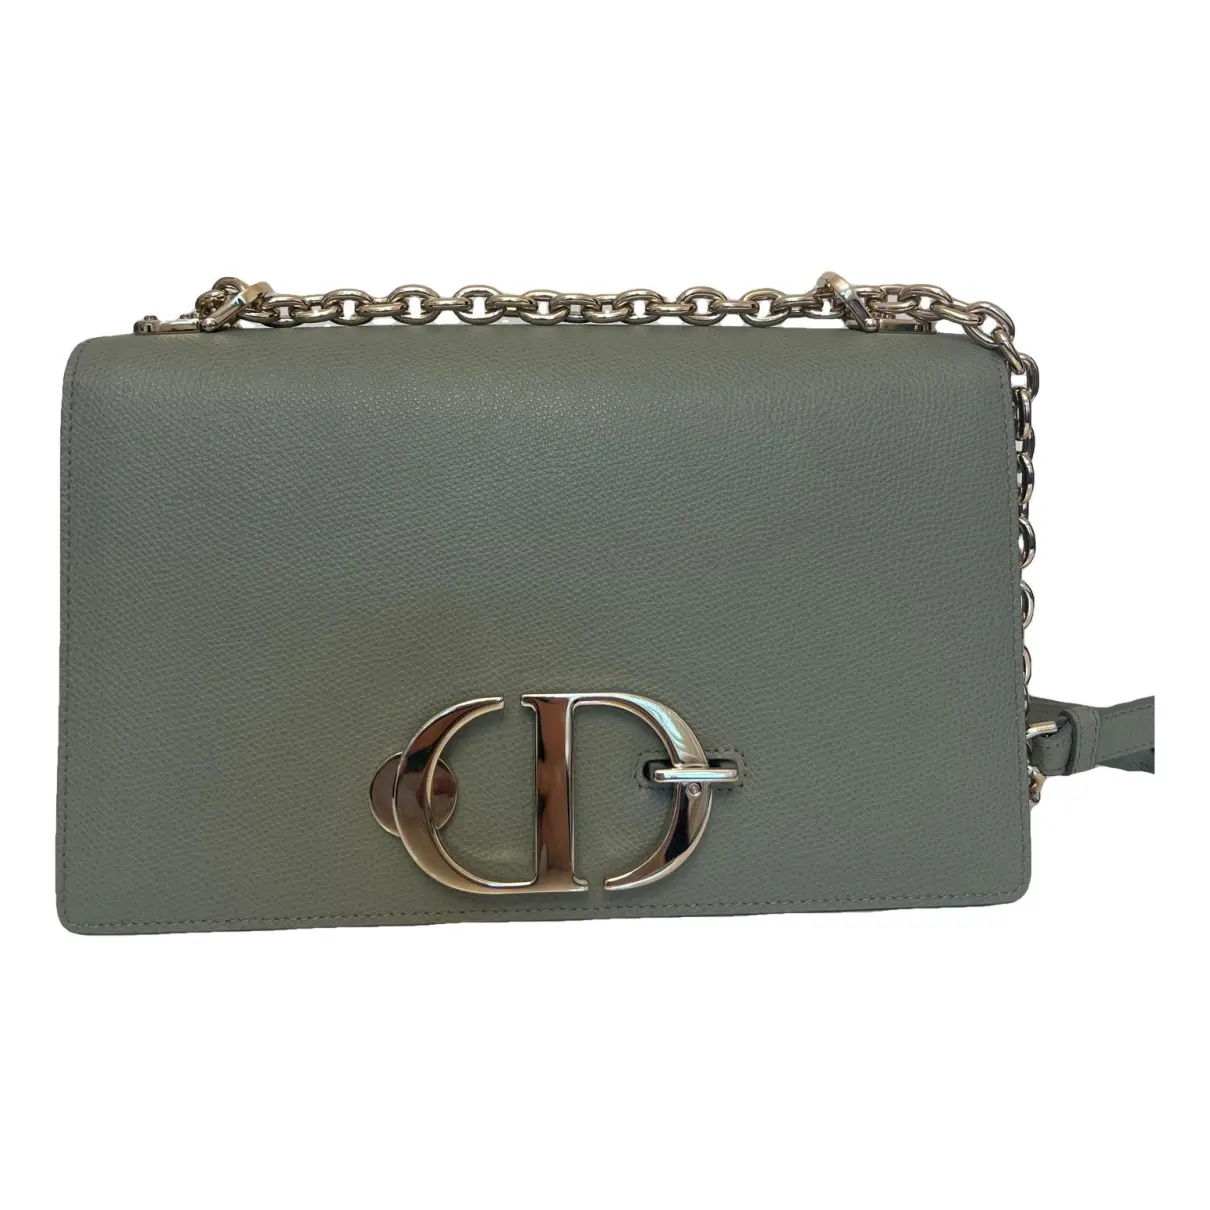 30 Montaigne Flap Chain leather crossbody bag